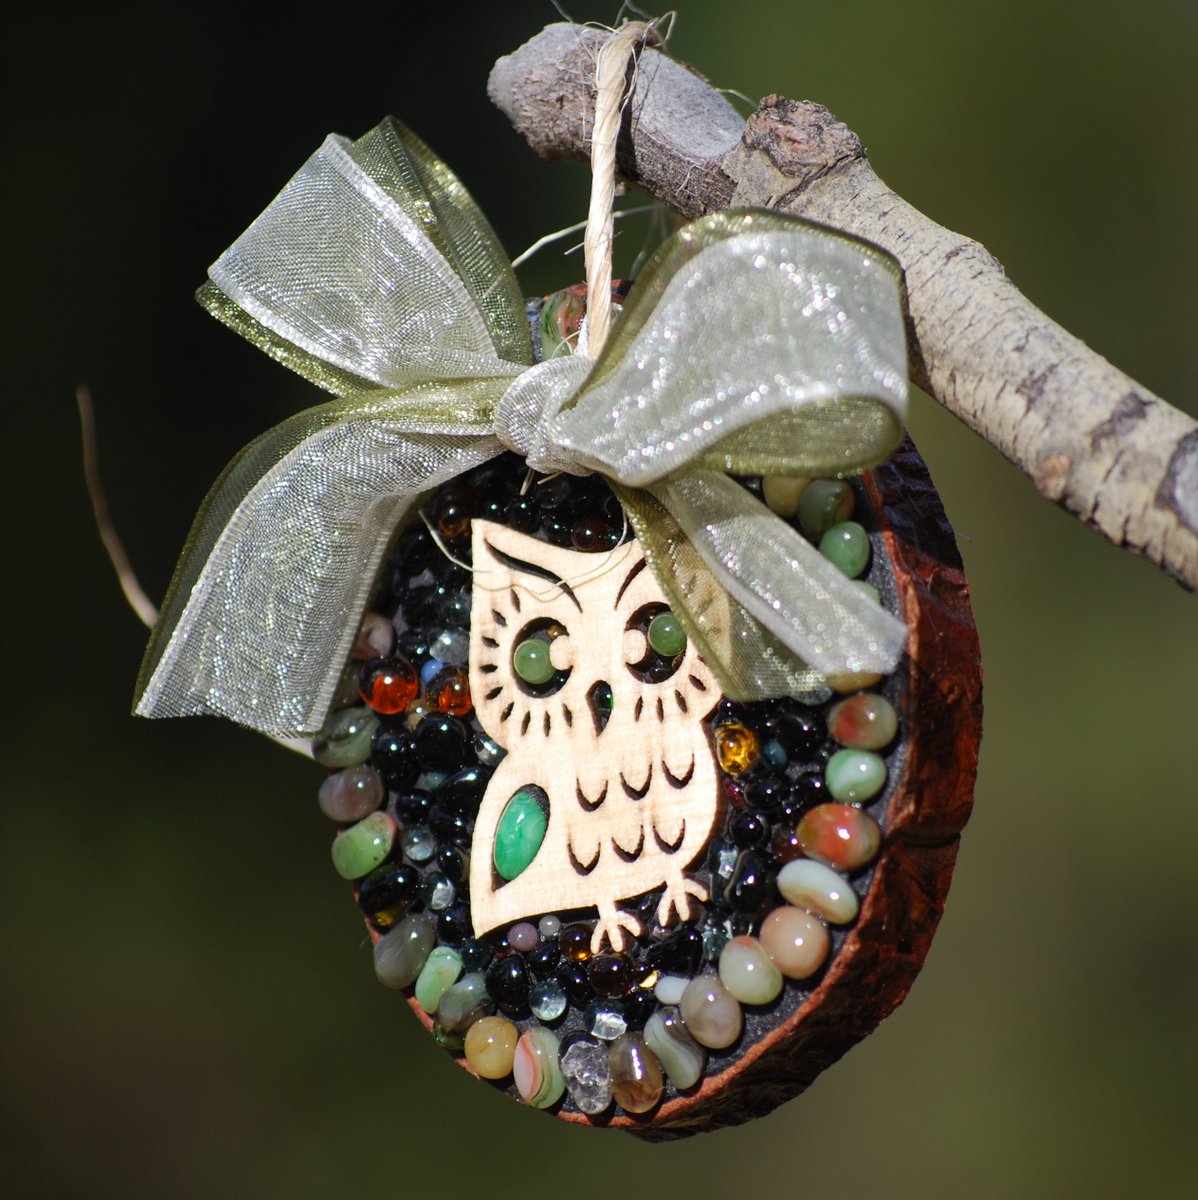 Excited to share the latest addition to my #etsy shop: Mosaic Christmas Ornament with Cute Owl makes the perfect holiday gift for neighbors, teachers, family and friends etsy.me/3mhyorI #christmas #mosaicornament #christmasornament #mosaicchristmas #mosaicowl